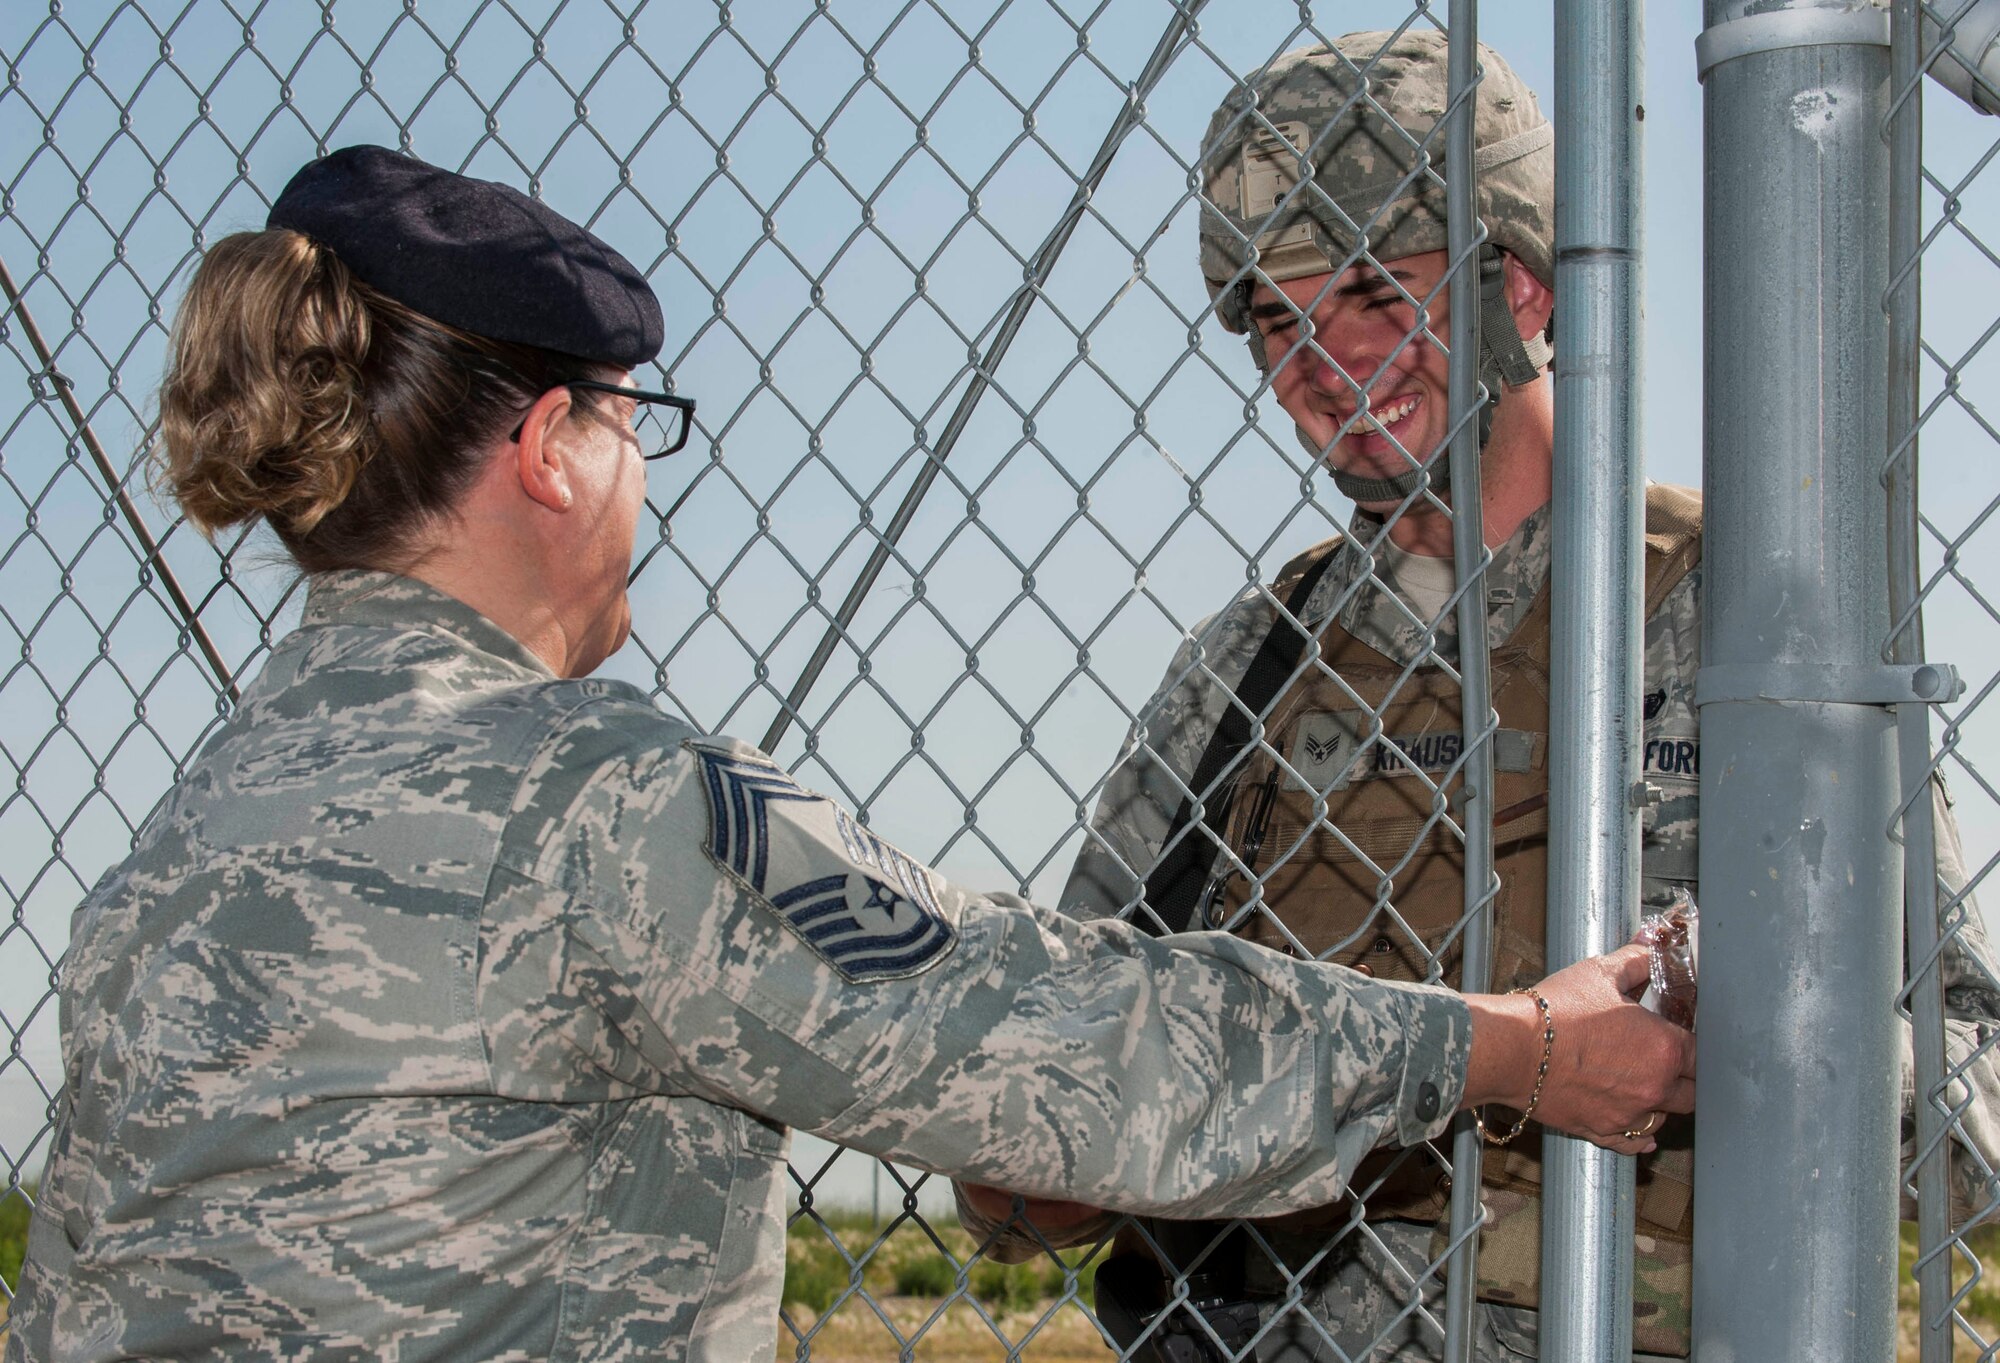 Chief Master Sgt. Melissa Permar, 791st Missile Security Forces Squadron security forces manager, talks to Senior Airman William Krausch, 791st MSFS response force leader, during a morale visit to the missile complex in North Dakota, July 30, 2014. Krausch was guarding maintenance Airmen conducting code changes at the site. (U.S. Air Force photo/Senior Airman Stephanie Morris)